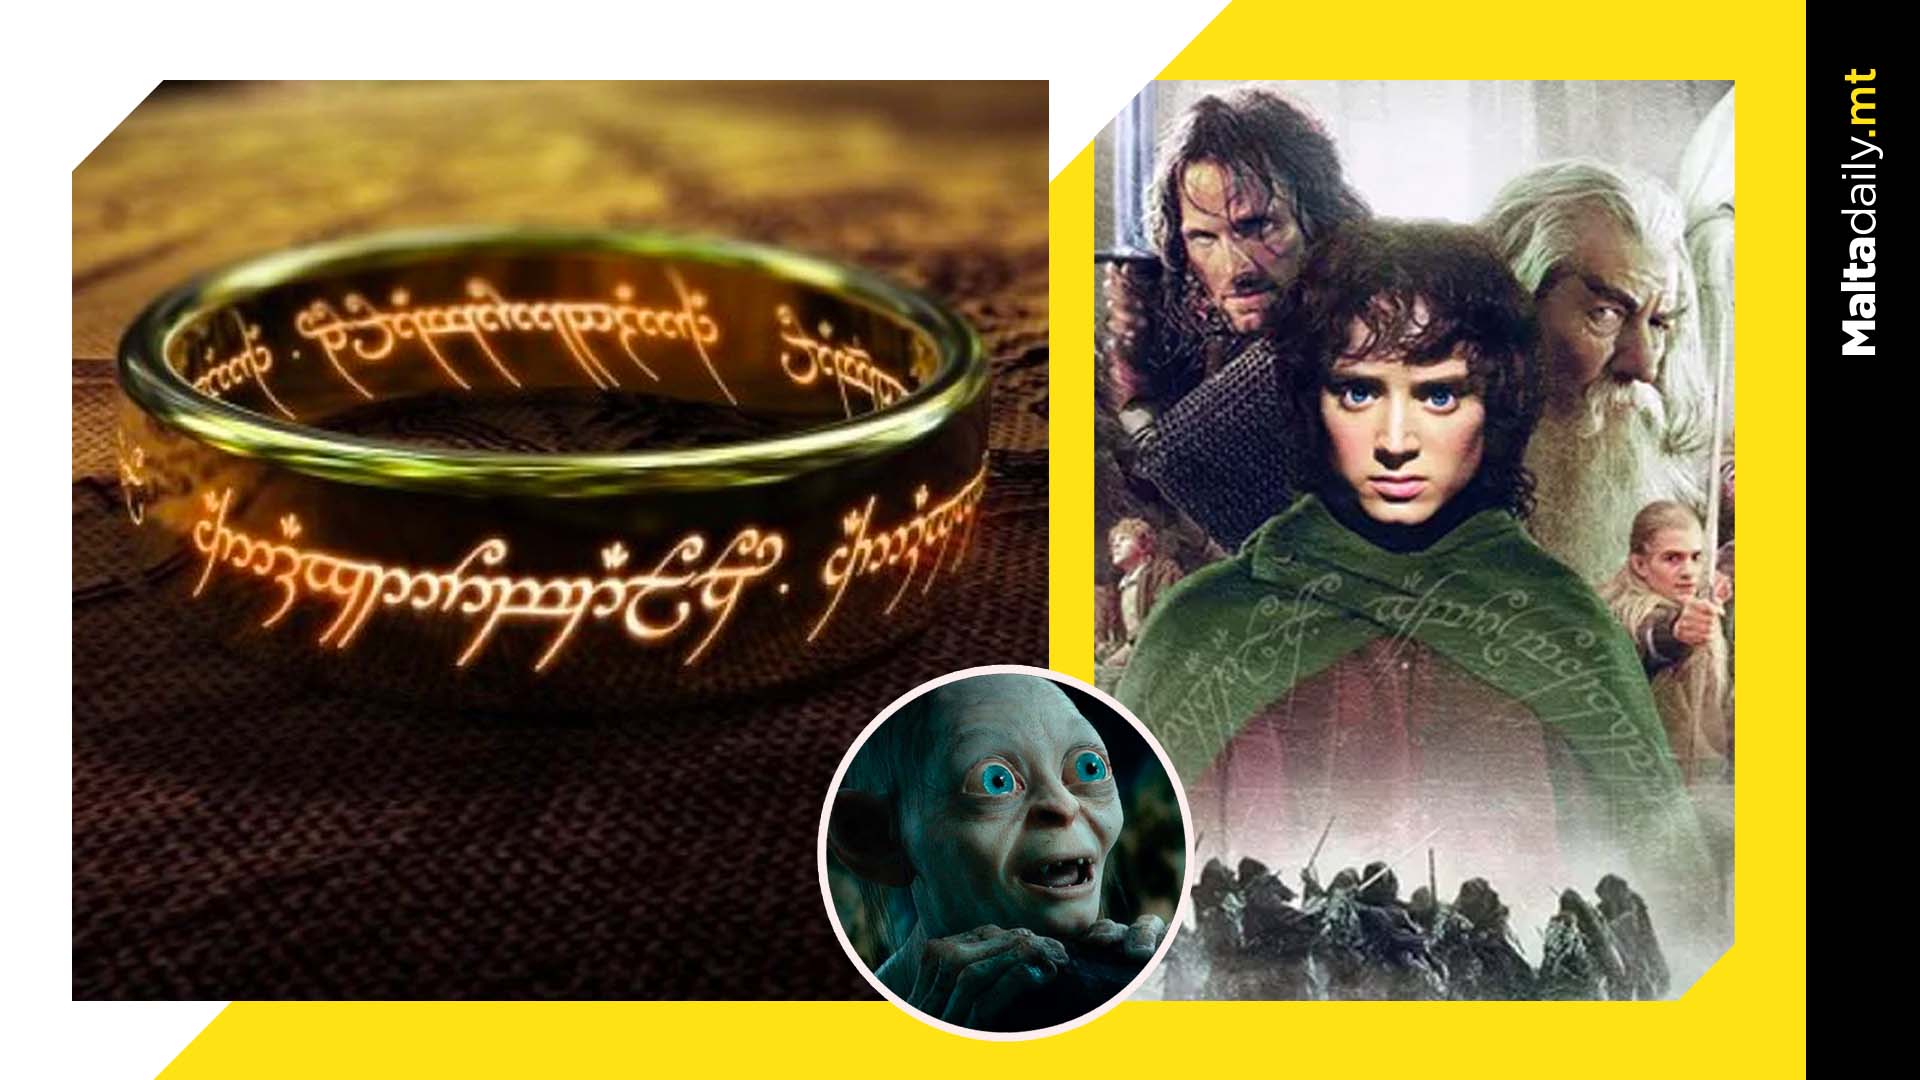 More Lord of the Rings movies to be released over next few years